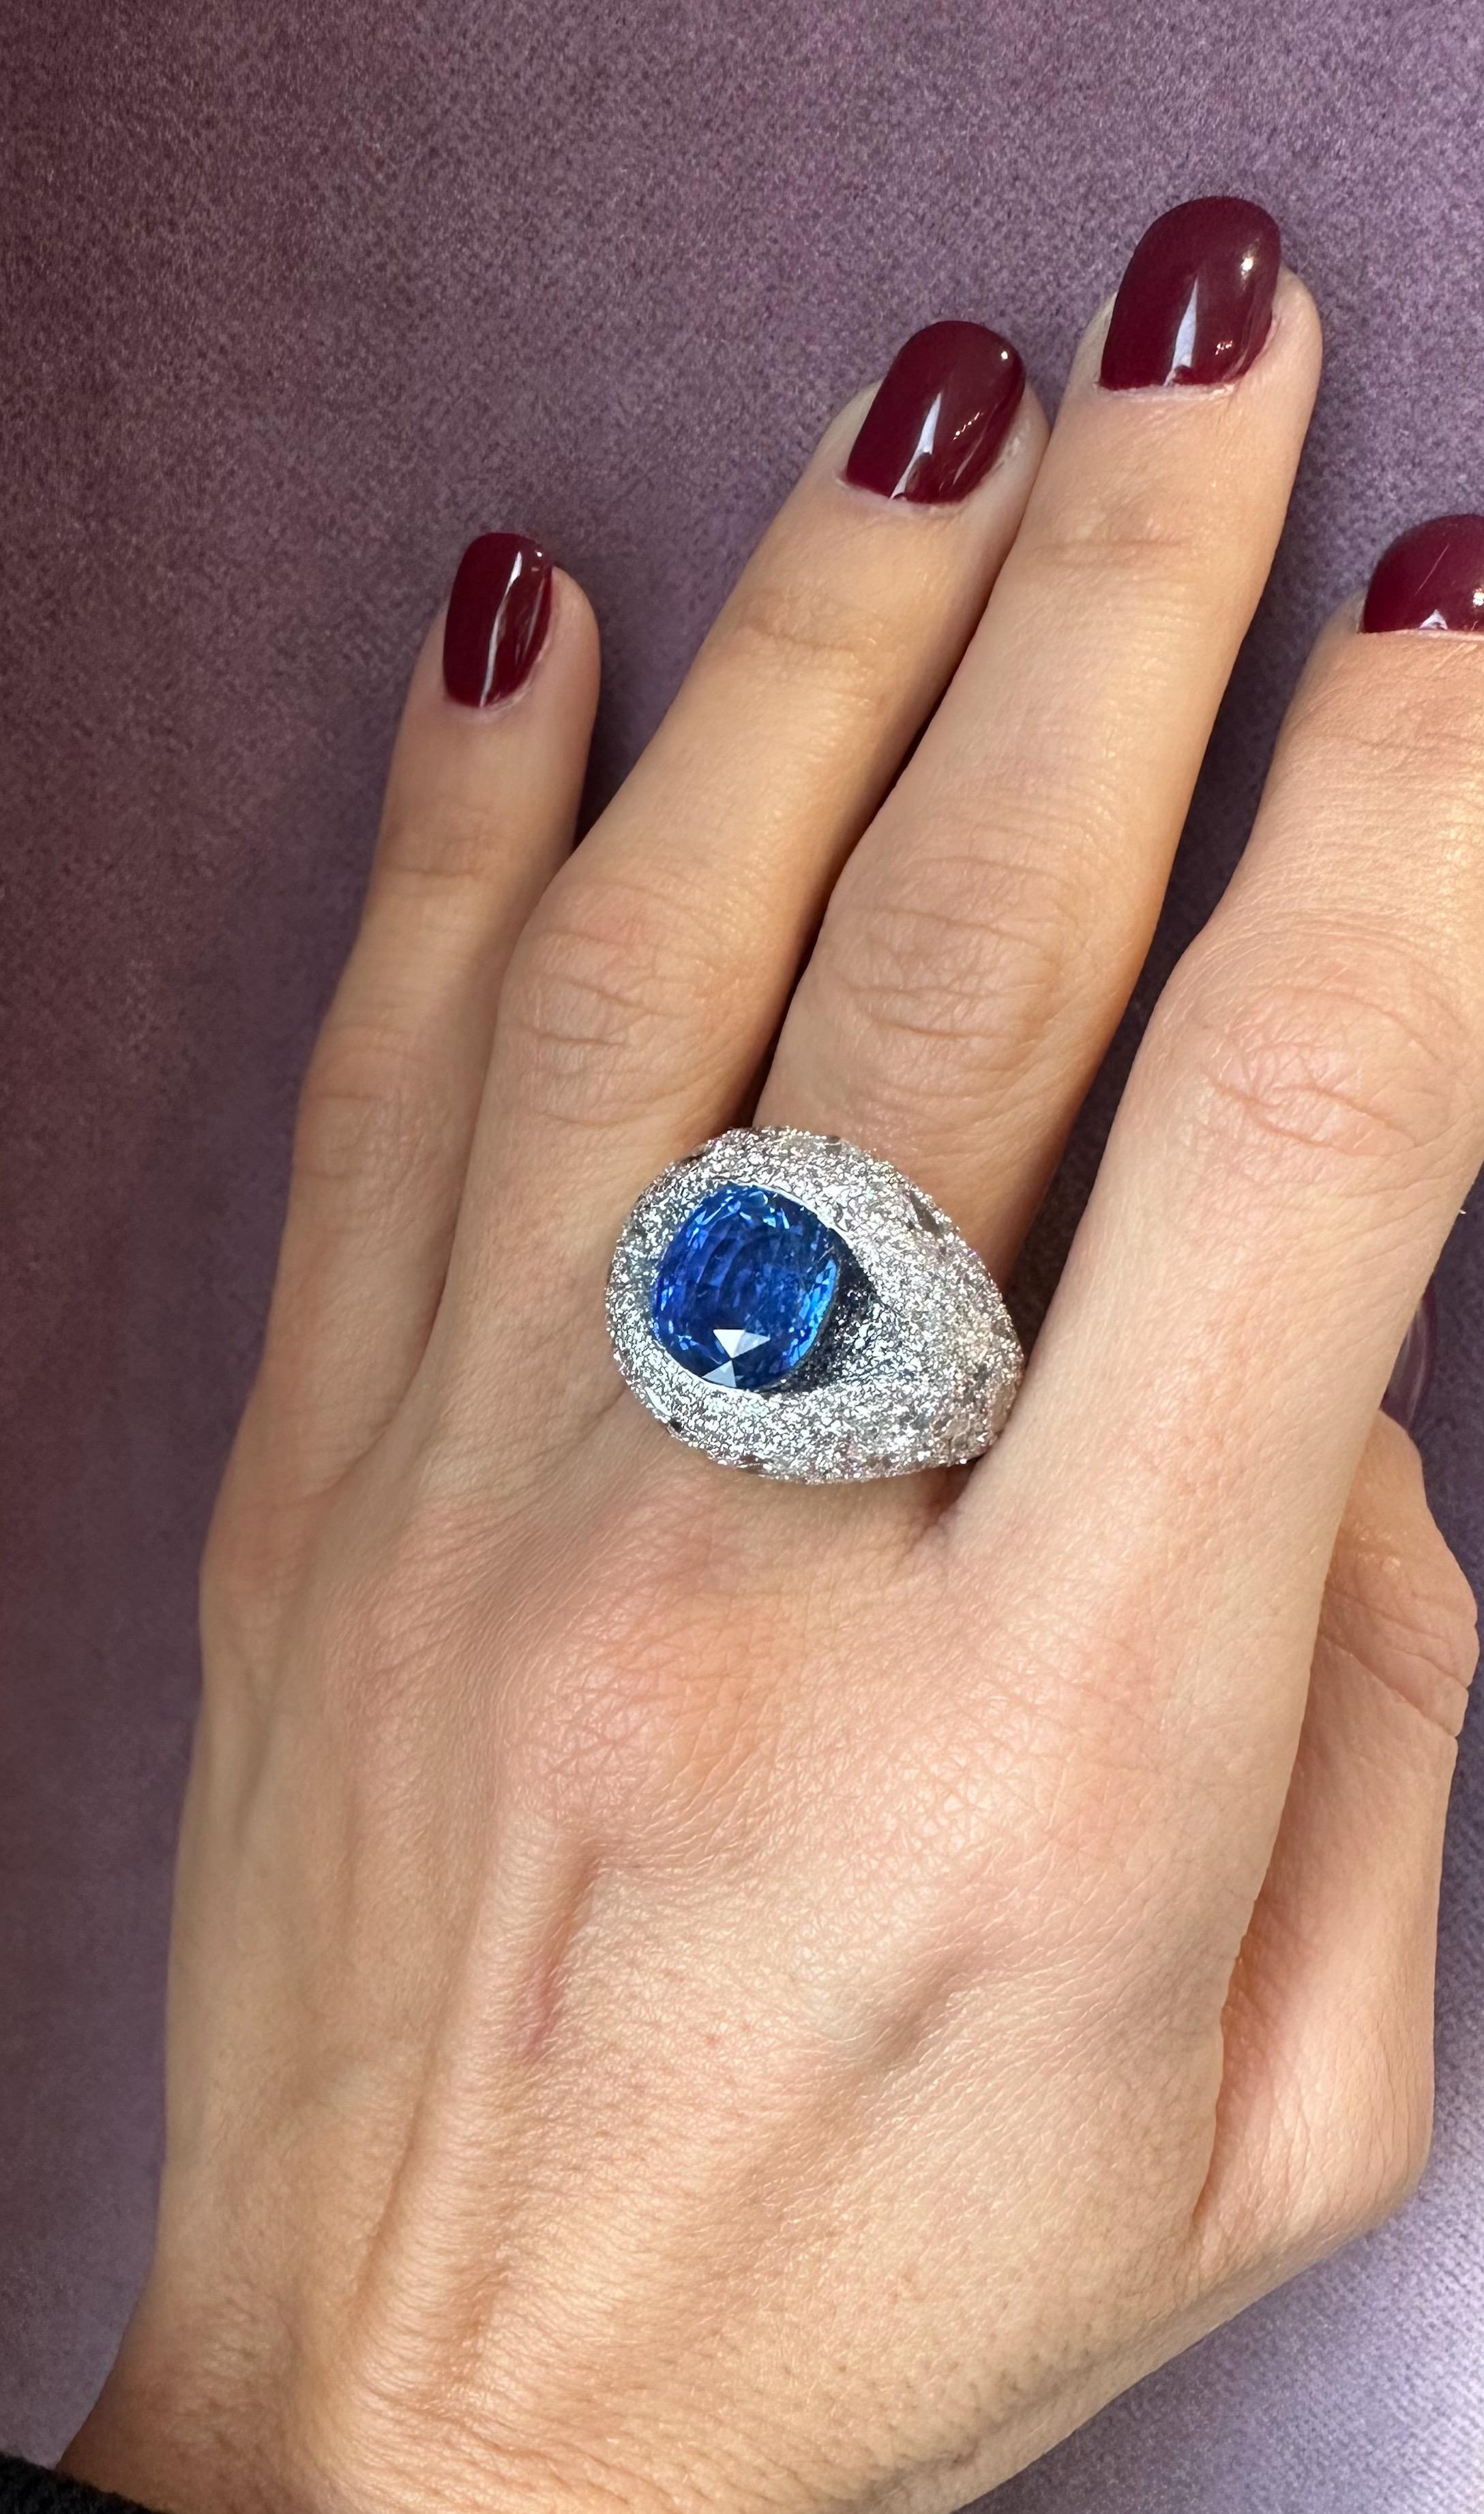 Rosior Contemporary Cocktail Ring set in White Gold with:
- 1 Cushion Cut Intense to Vivid Blue Sapphire with 7.03 ct, certified by GRS (Gemresearch Swisslab) as a non heated 